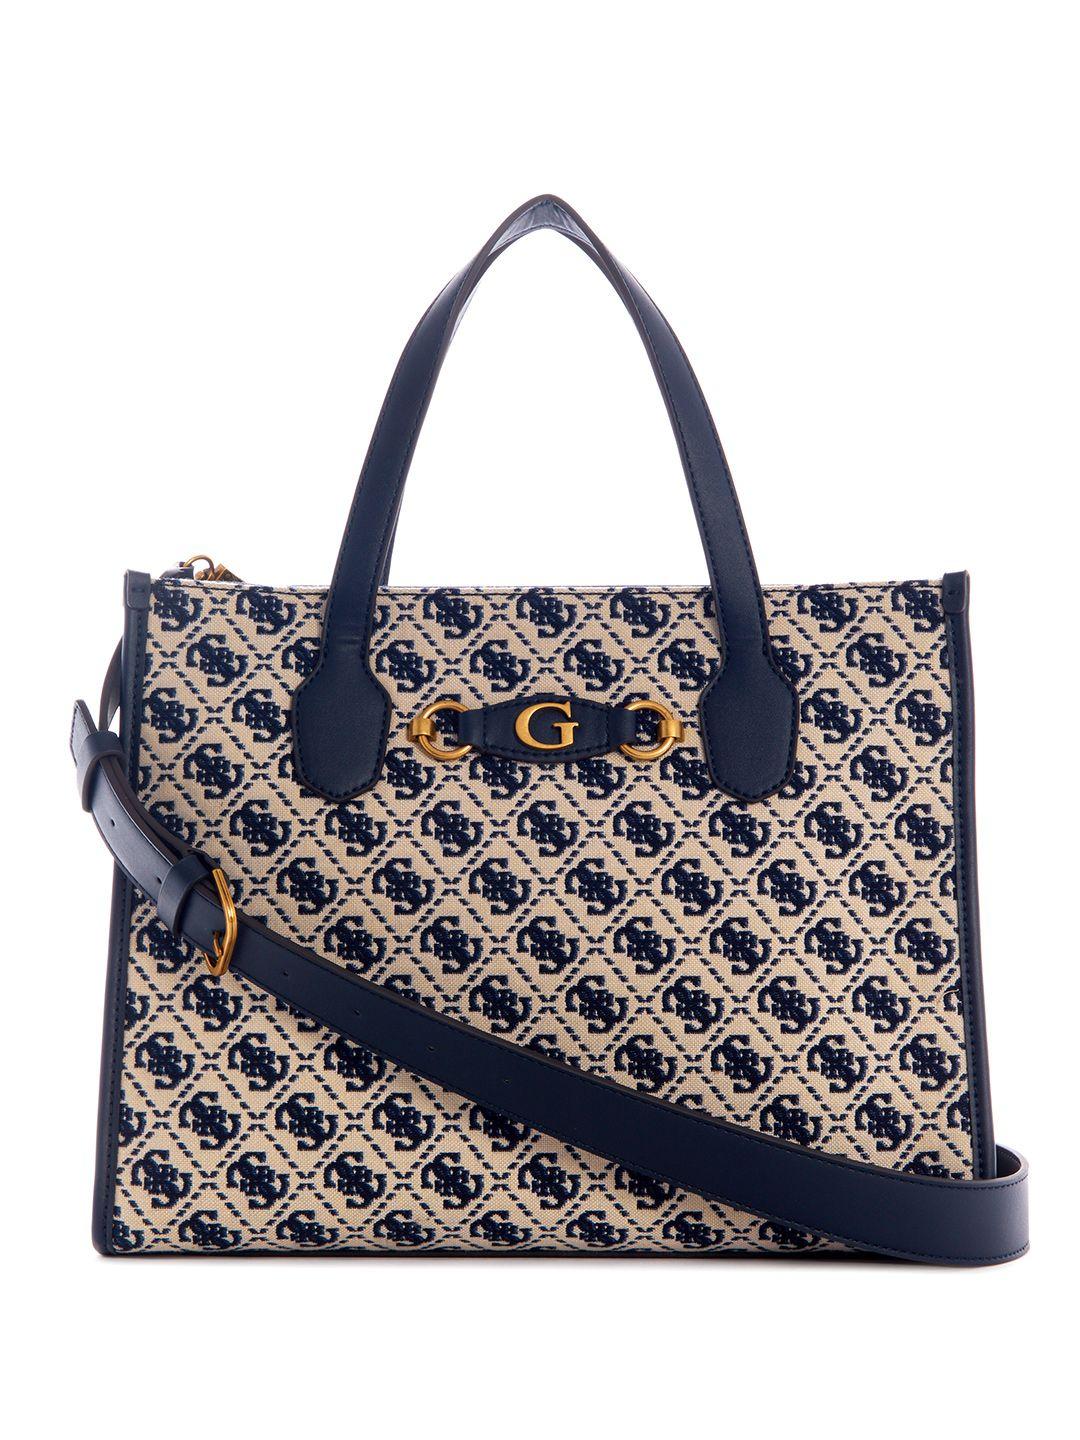 guess brand logo embroidered structured handheld bag